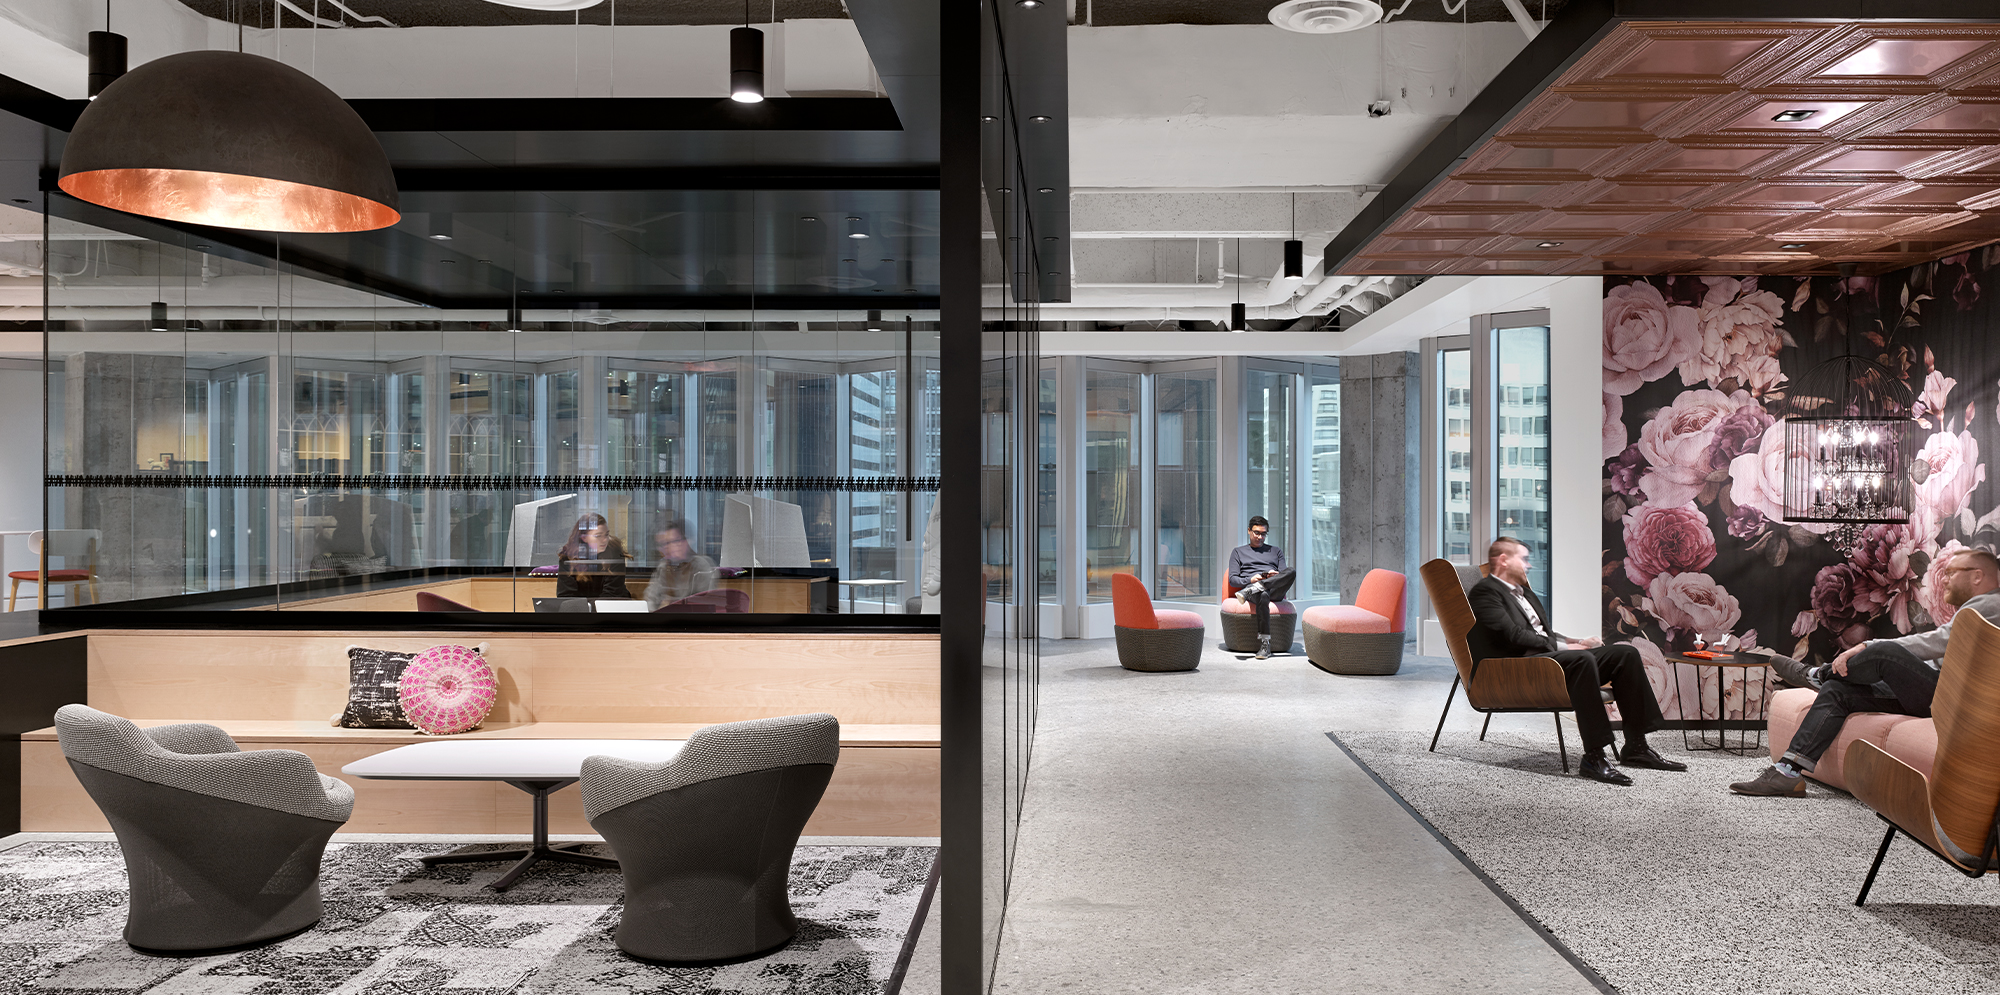 corporate office with smaller offices spaces within